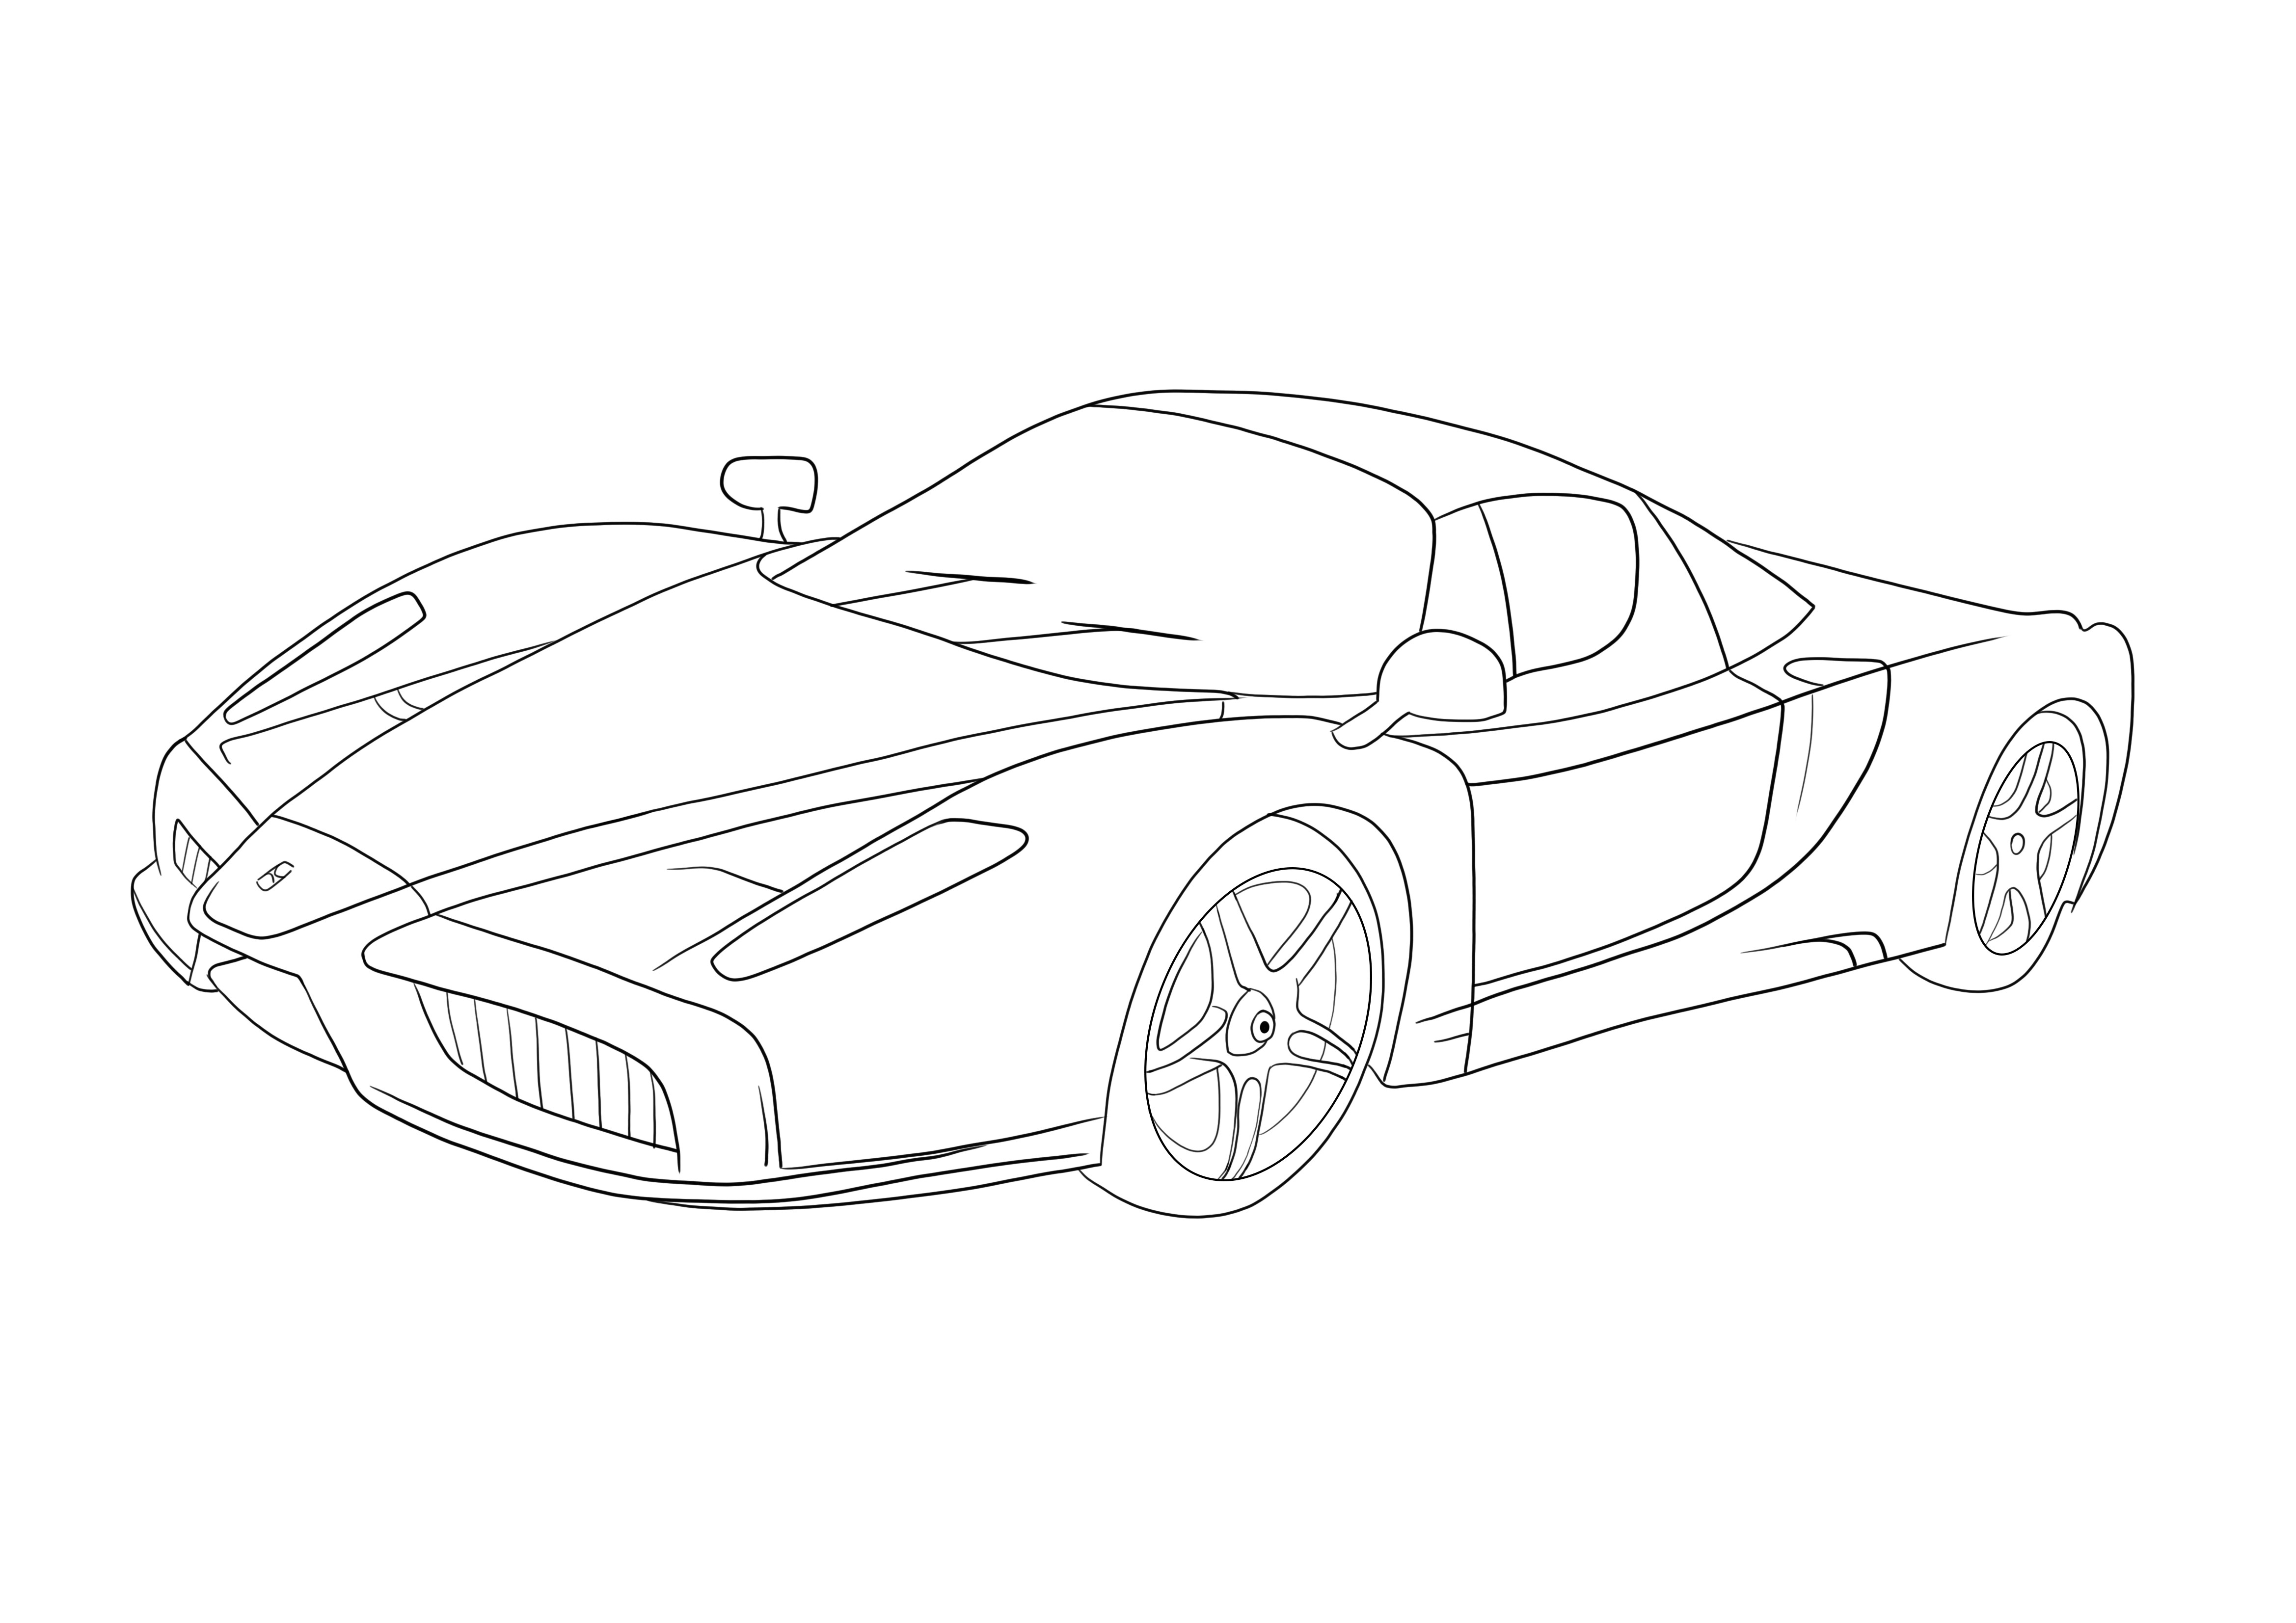 Ferrari Enzo car for free printing and coloring